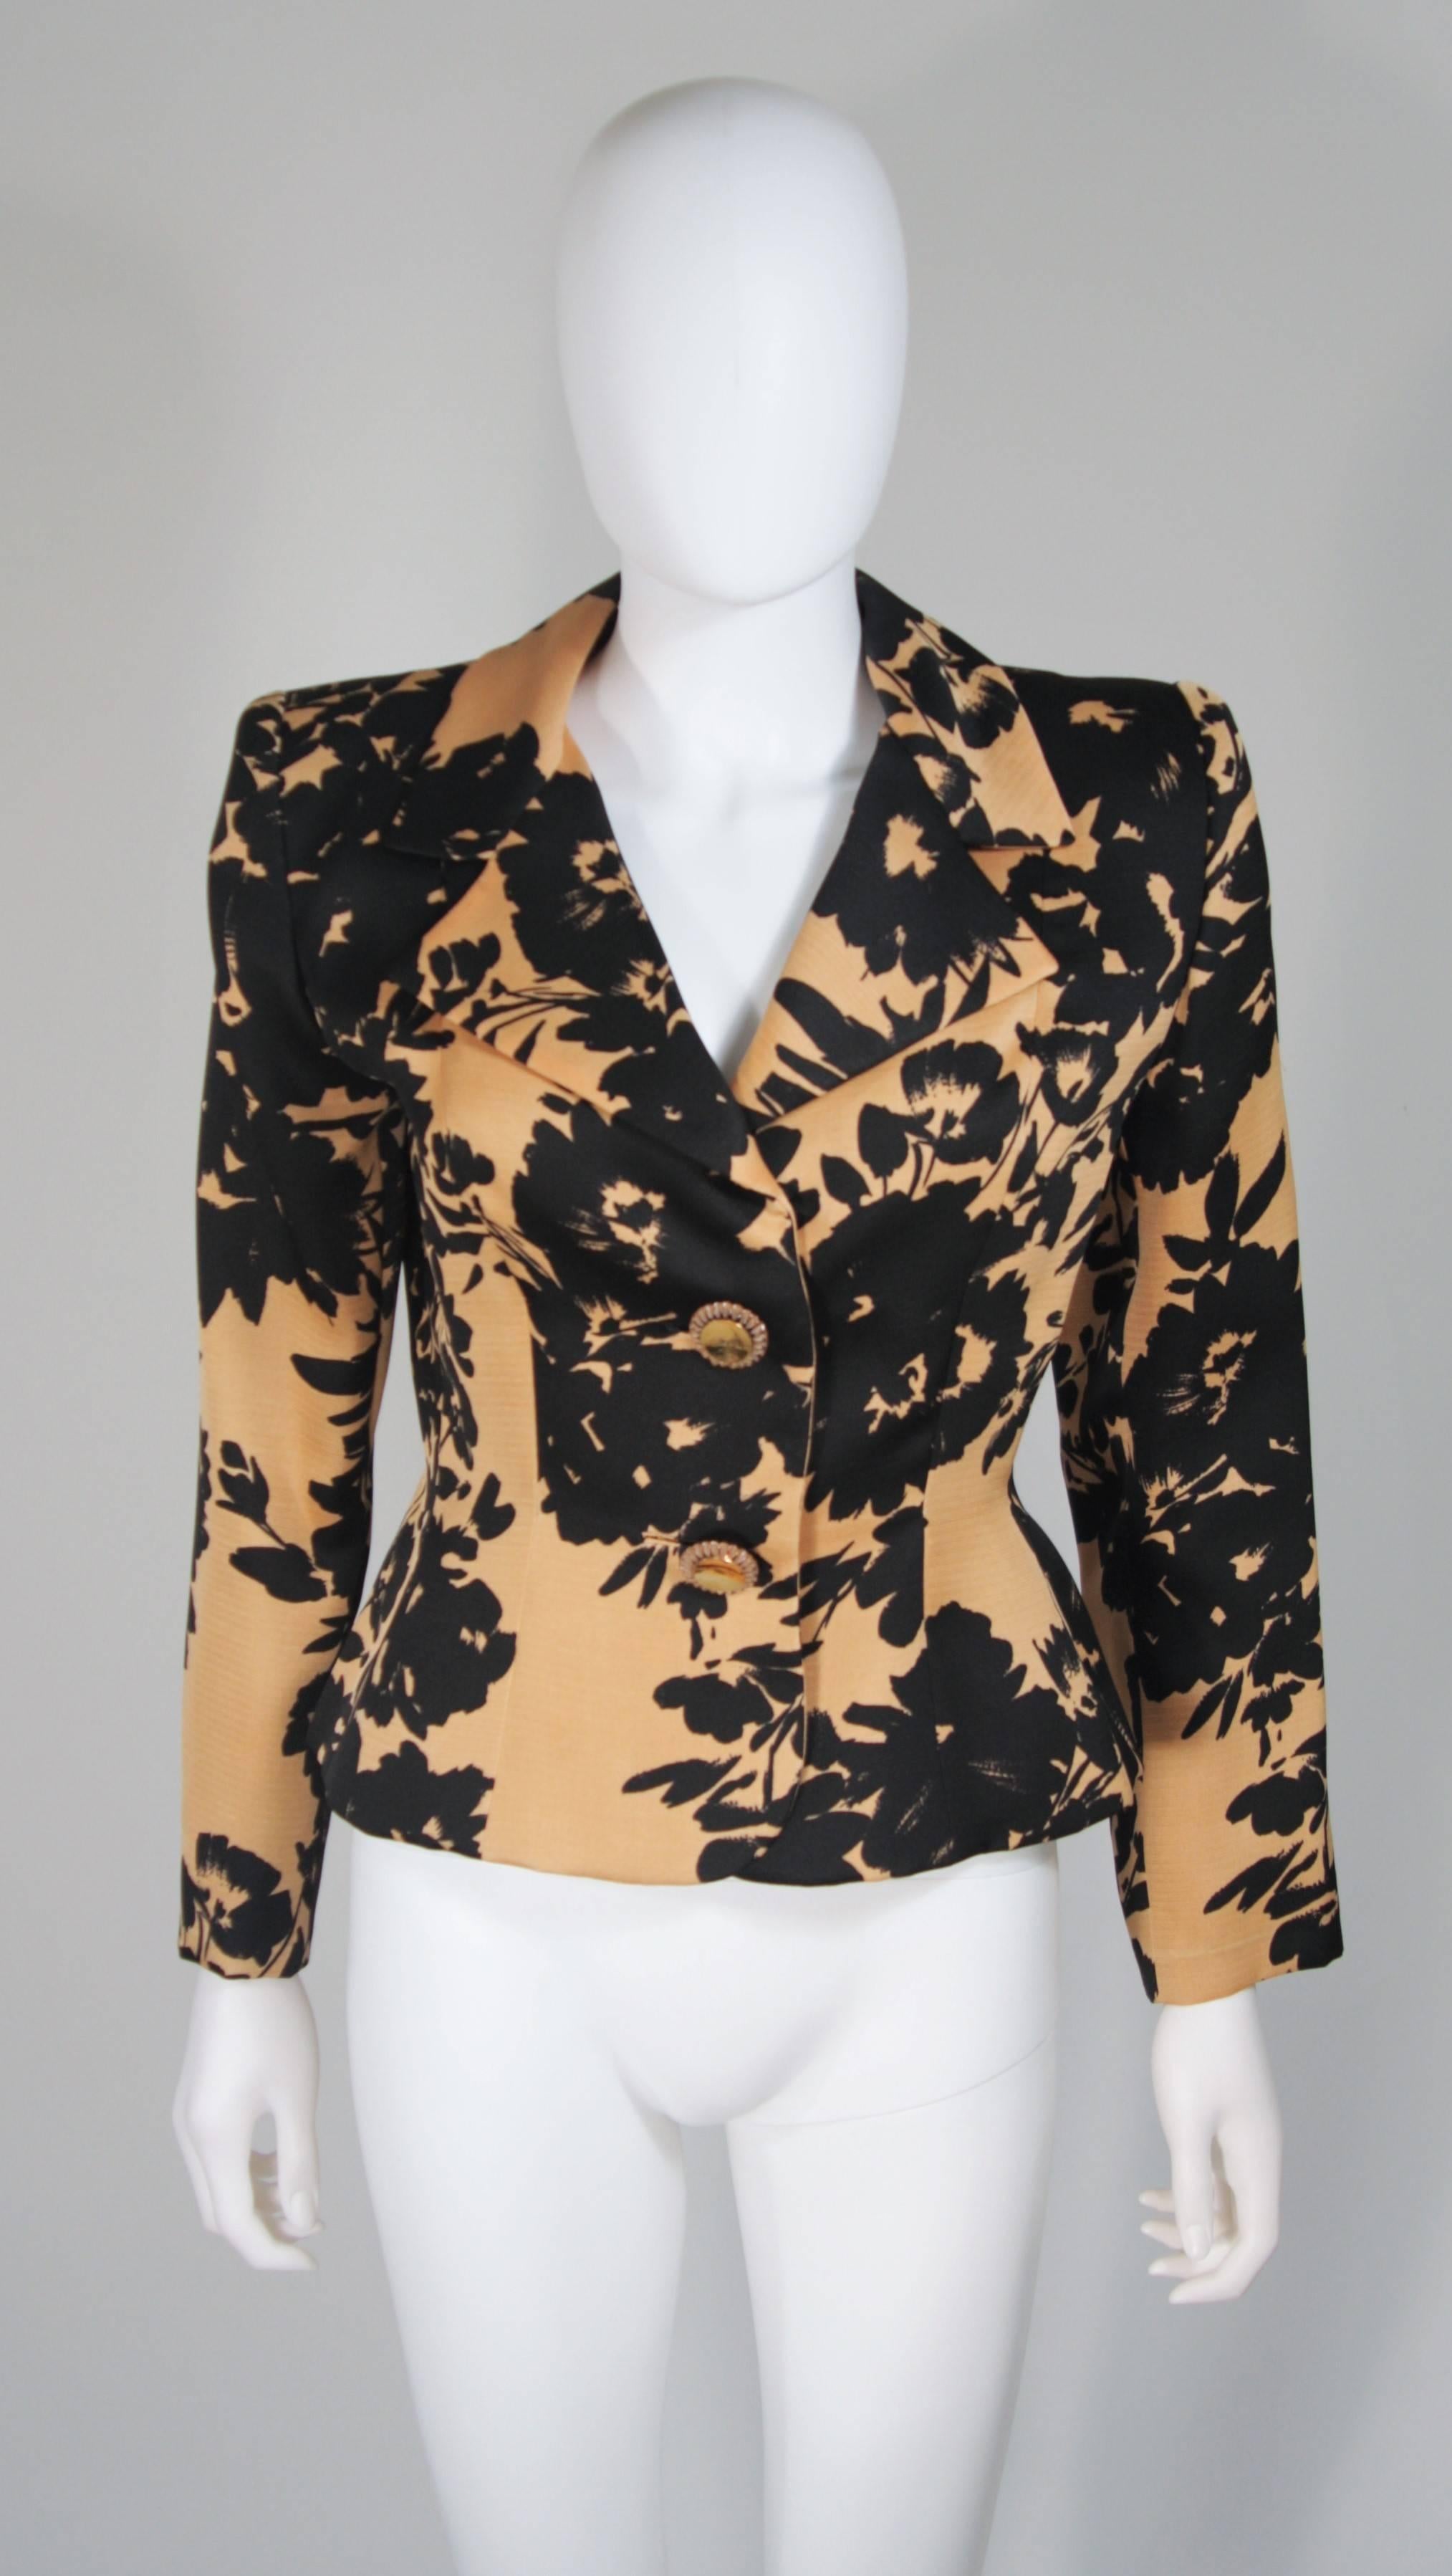 GIVENCHY Circa 1980s Apricot Brown and Black Floral Print Suit Size 6-8 3